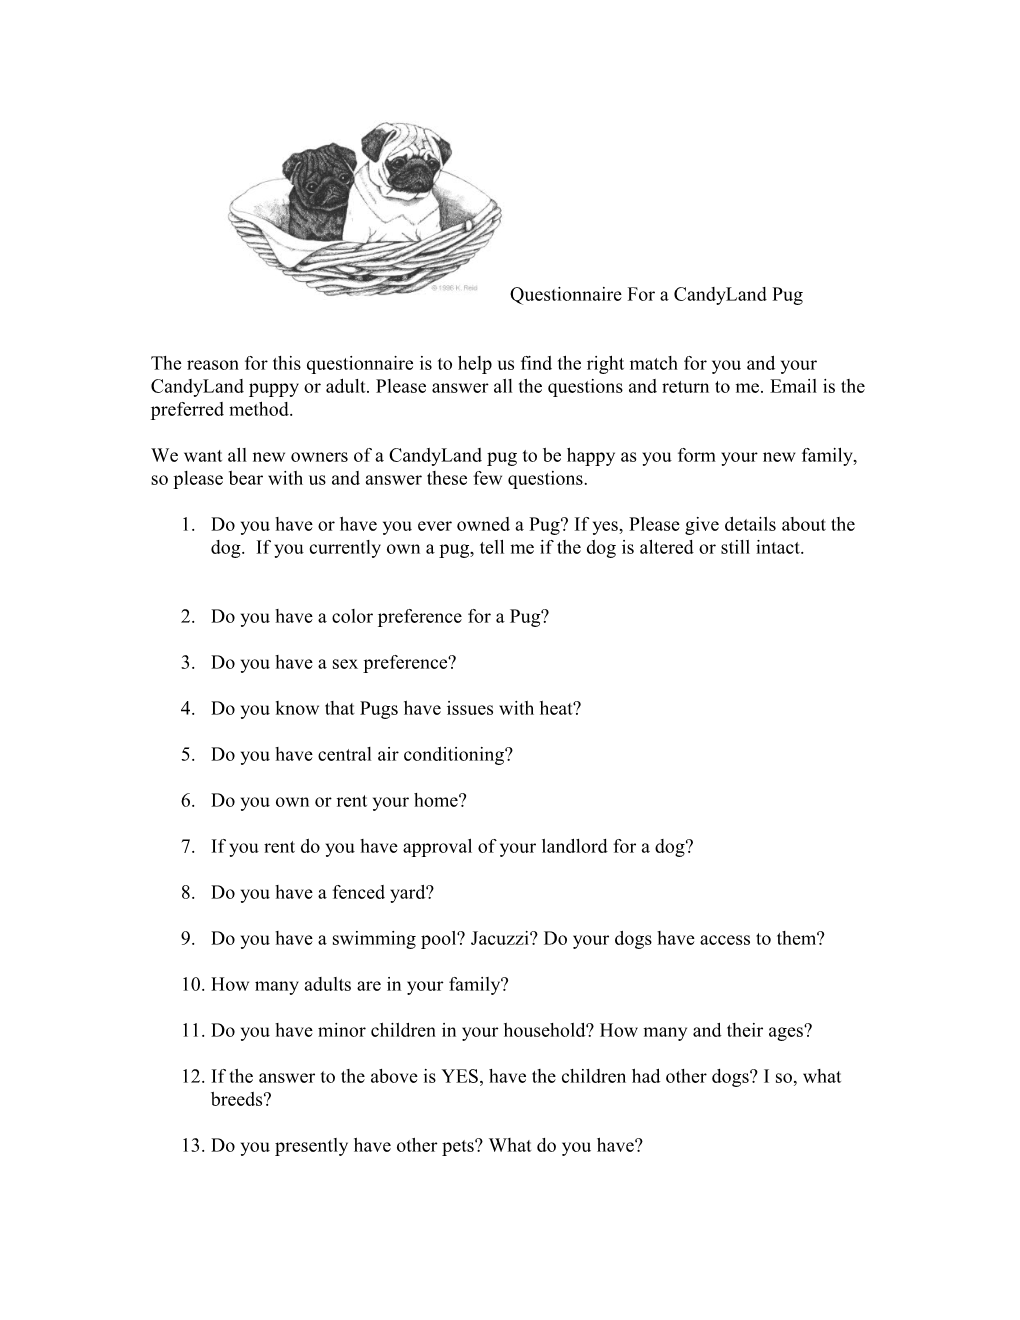 Questionnaire for a Candyland Pug